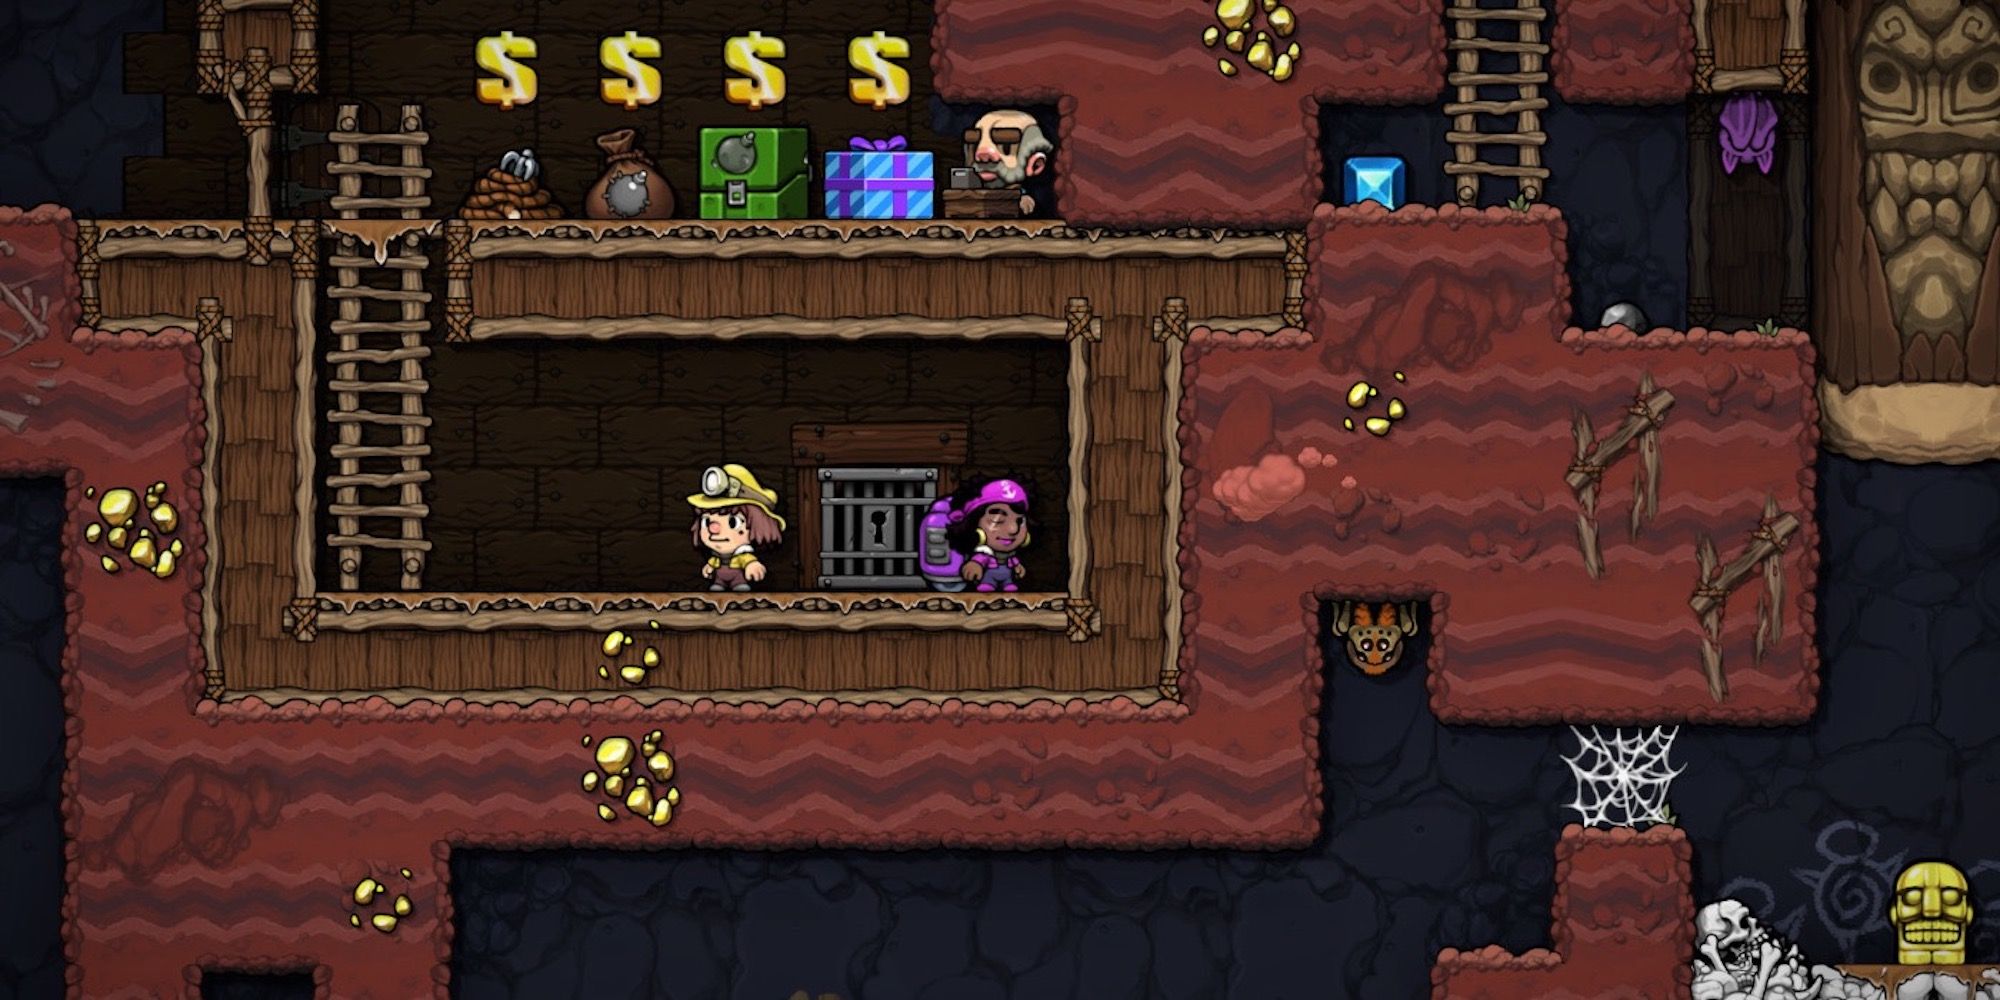 Exploring a dungeon in Spelunky 2